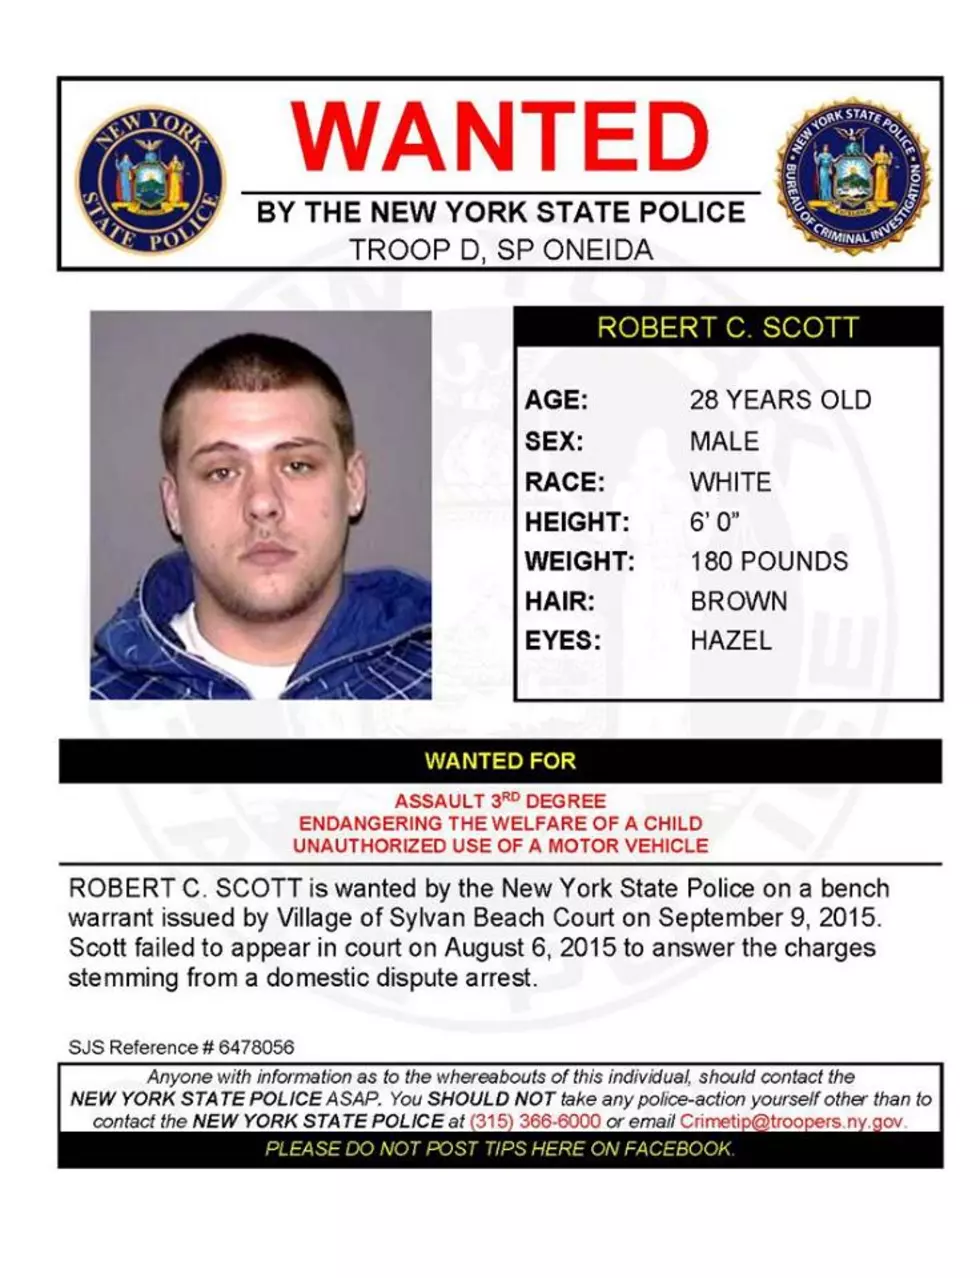 Warrant Wednesday: Man Wanted for Assault, Endangering the Welfare of a Child